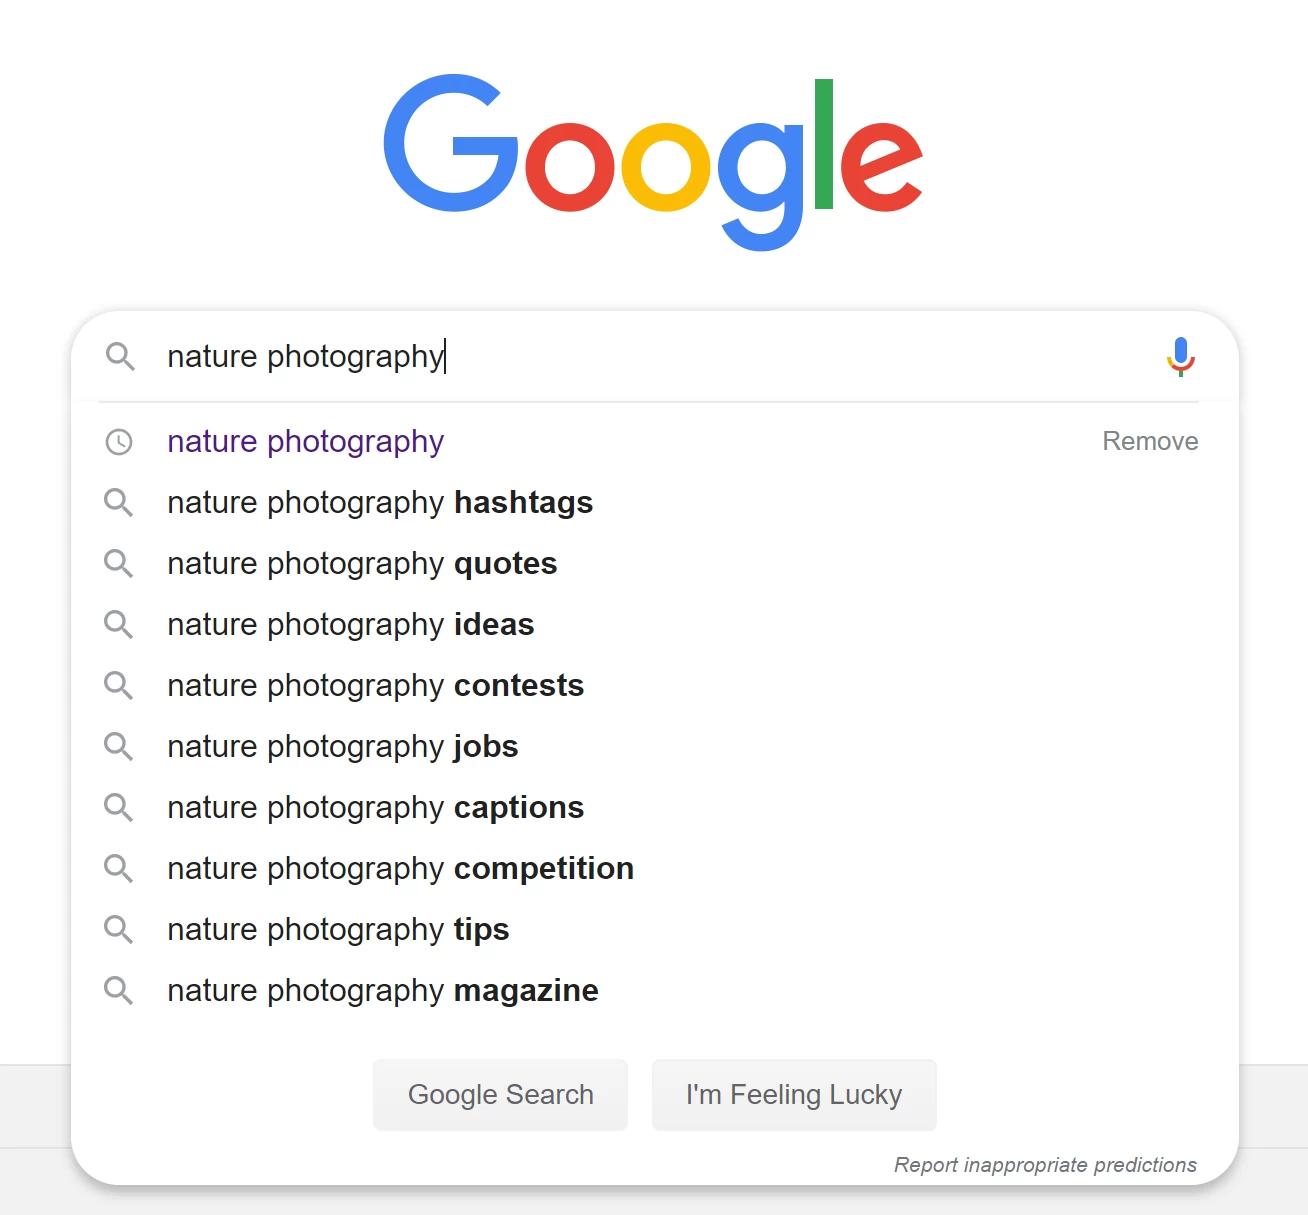 Google Search example